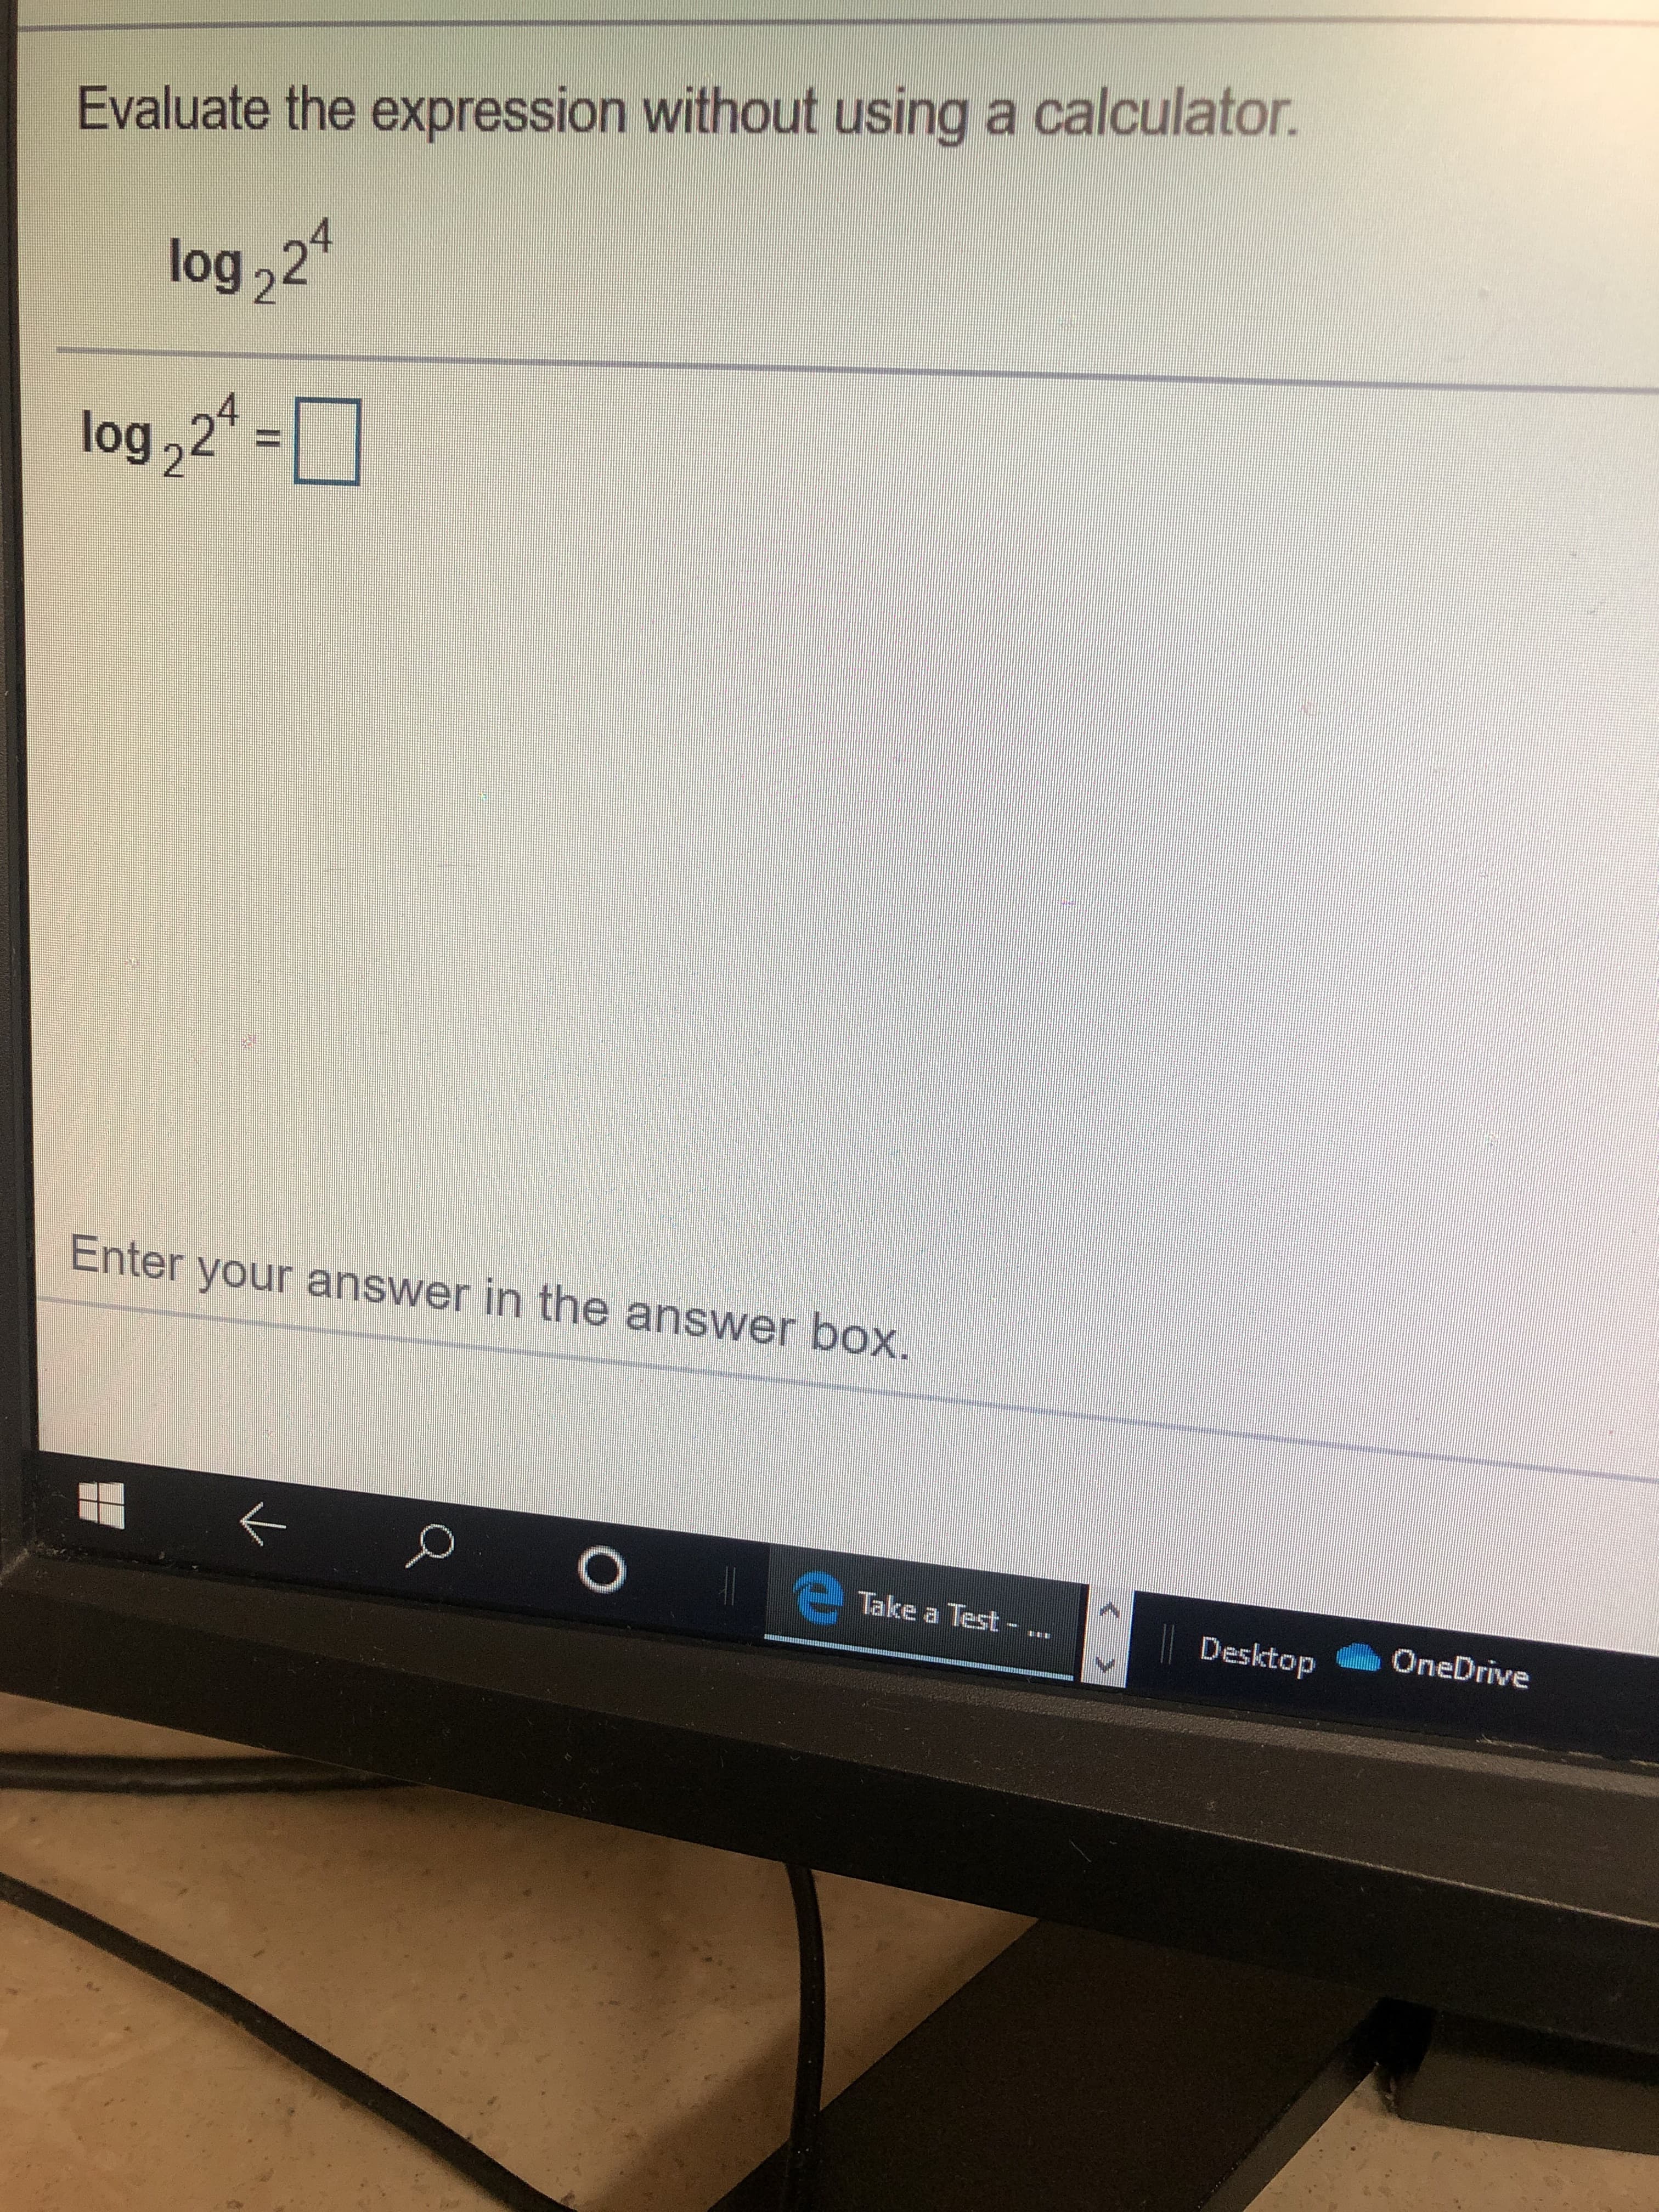 Evaluate the expression without using a calculator.
log 2
log2-
Enter your answer in the answer box.
Take a Test
OneDrive
Desktop
